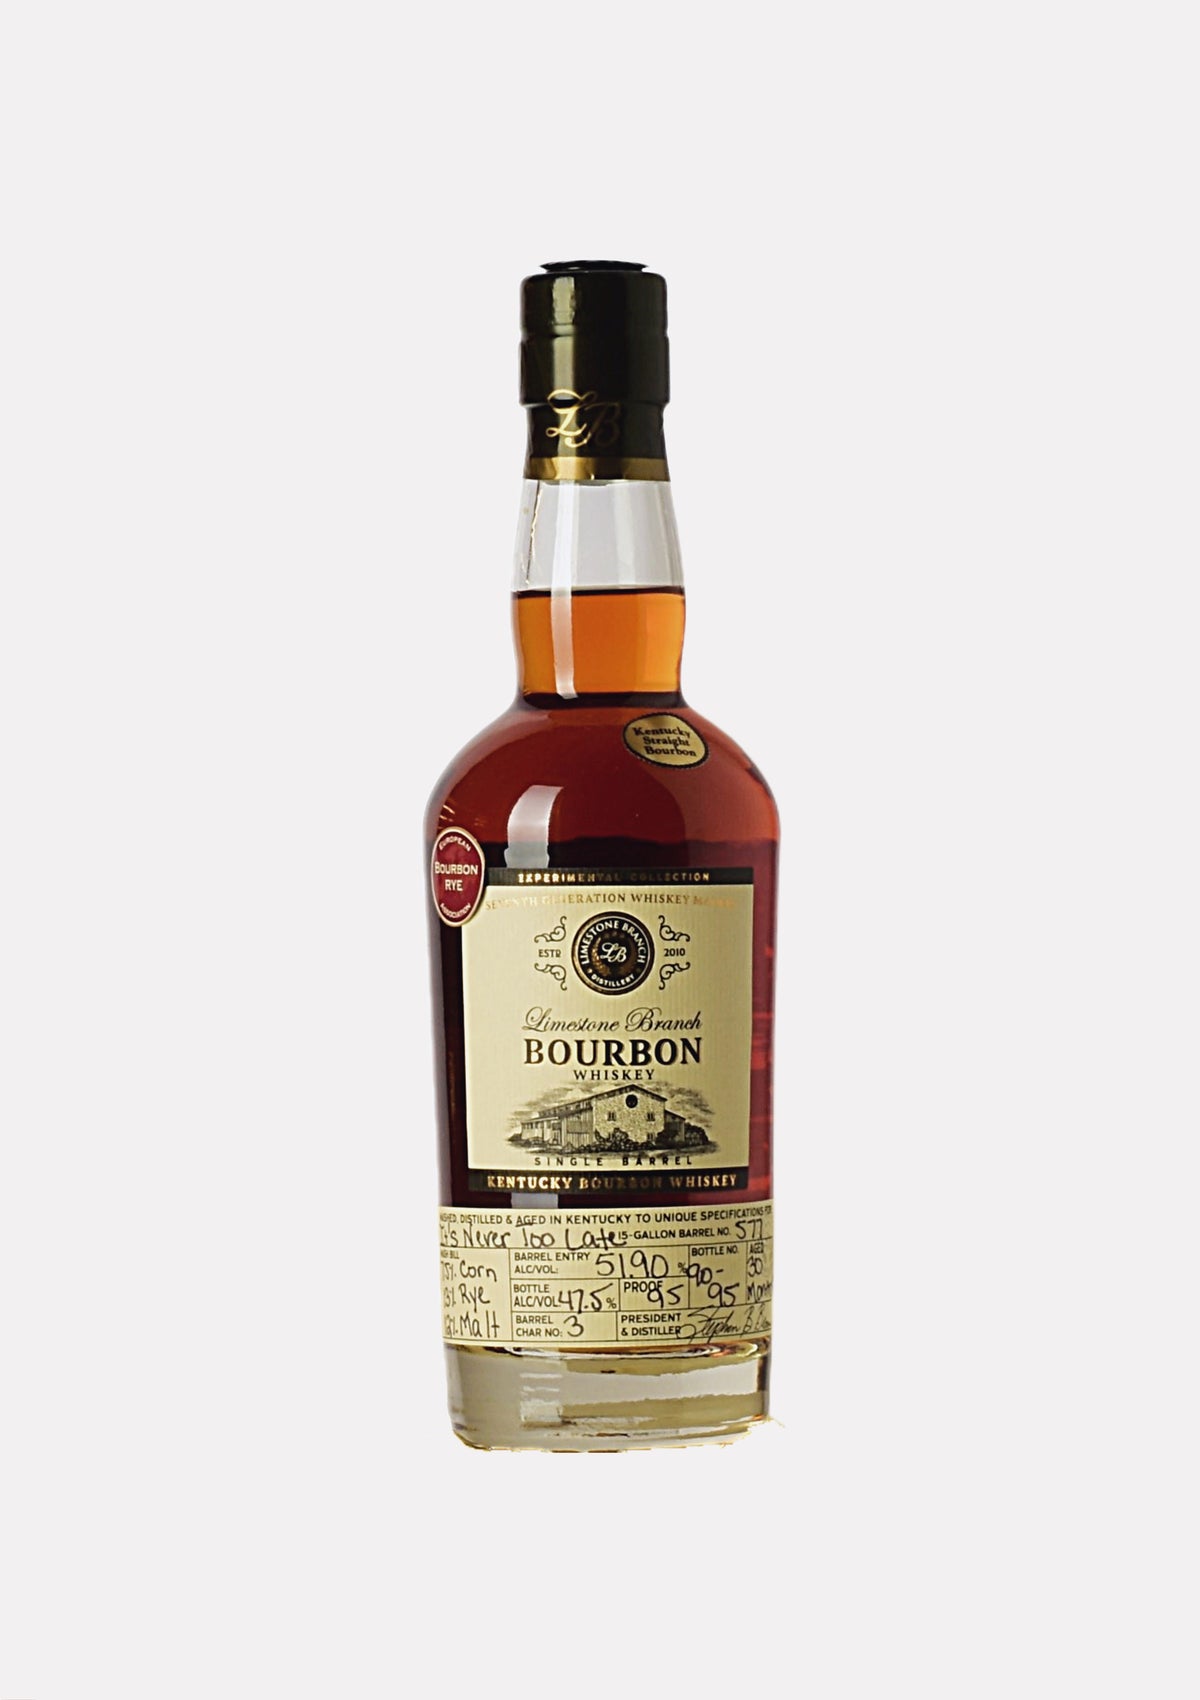 Limestone Branch Bourbon Whiskey It`s Never Too Late